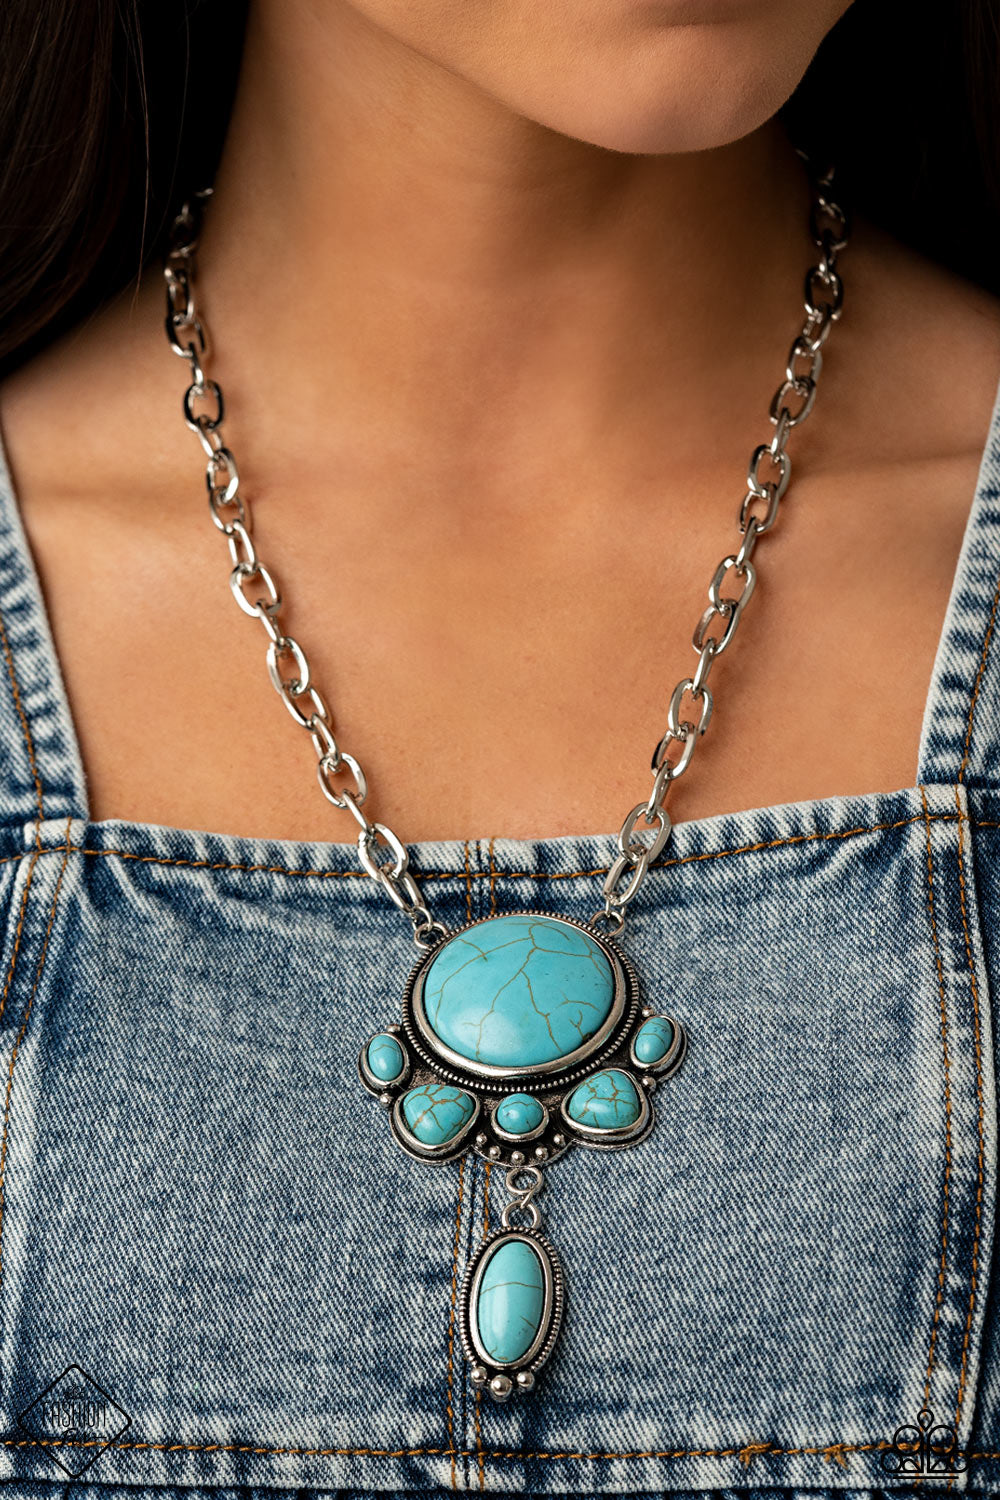 Geographically Gorgeous - Blue Necklace